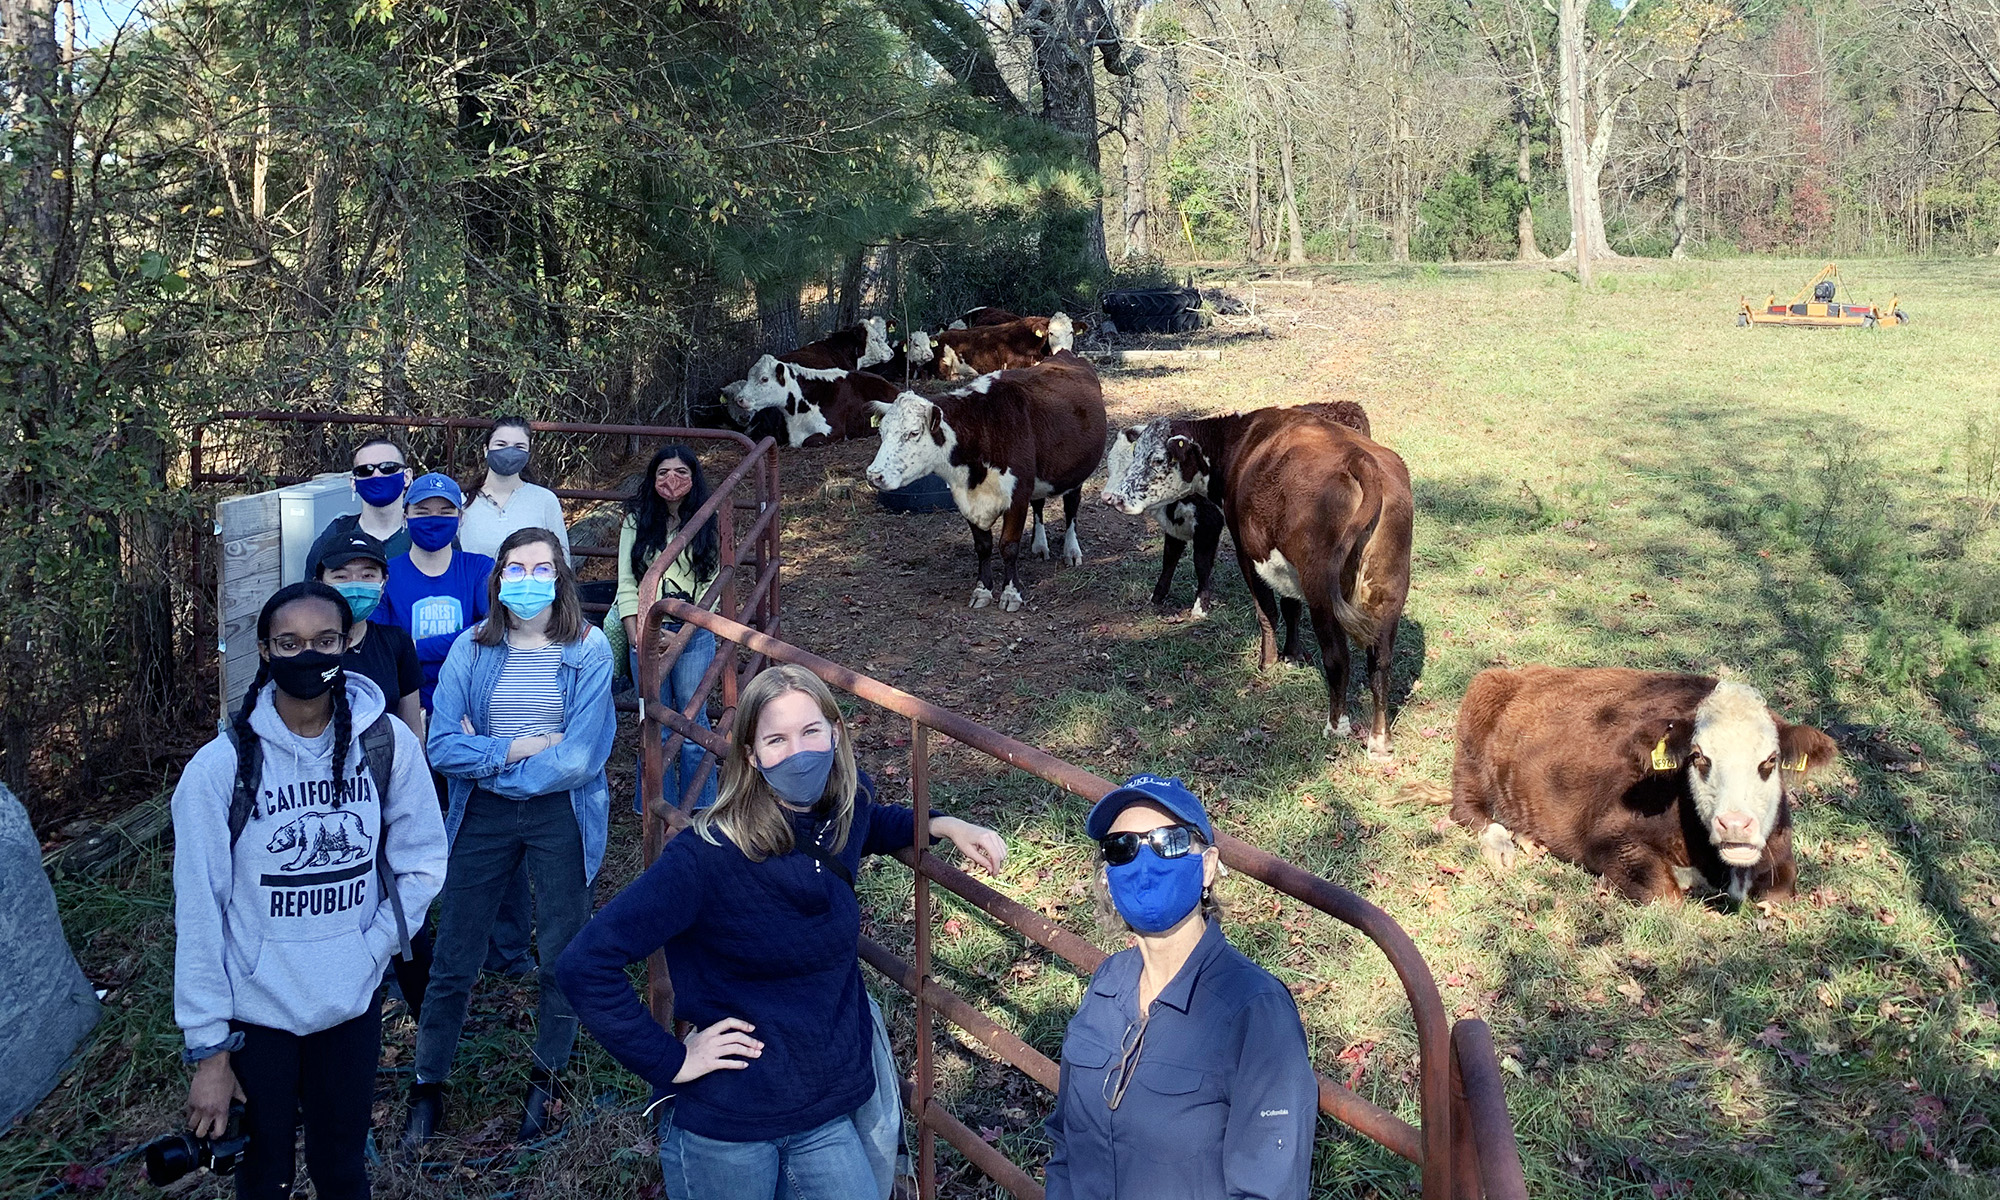 Bass Connections team members wearing masks and visiting a farm as part of their project team's research.